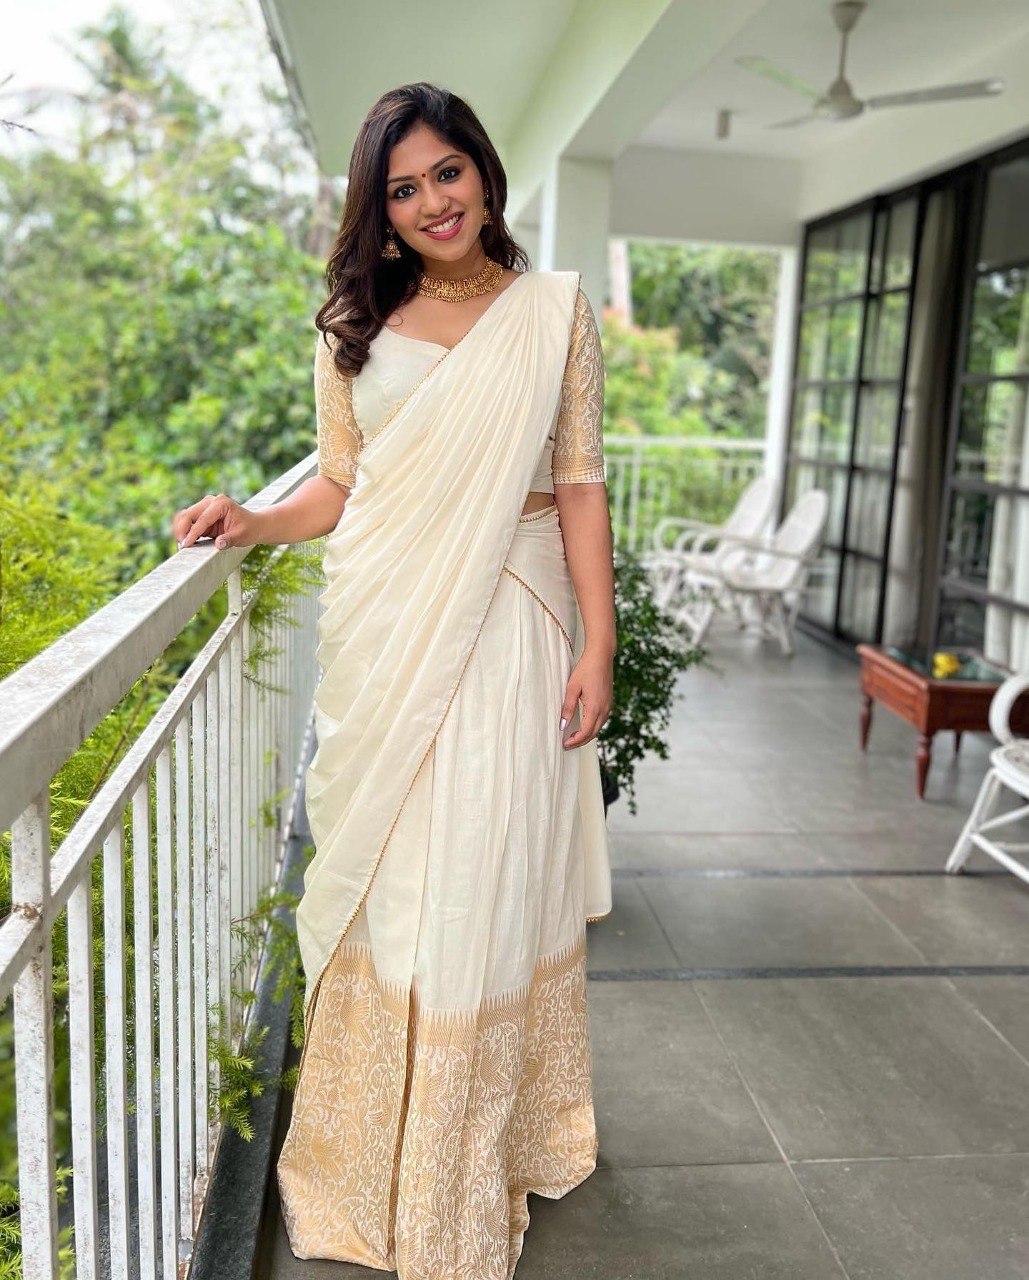 Nayanthara treats us with her pictures in a set saree for Vishu!